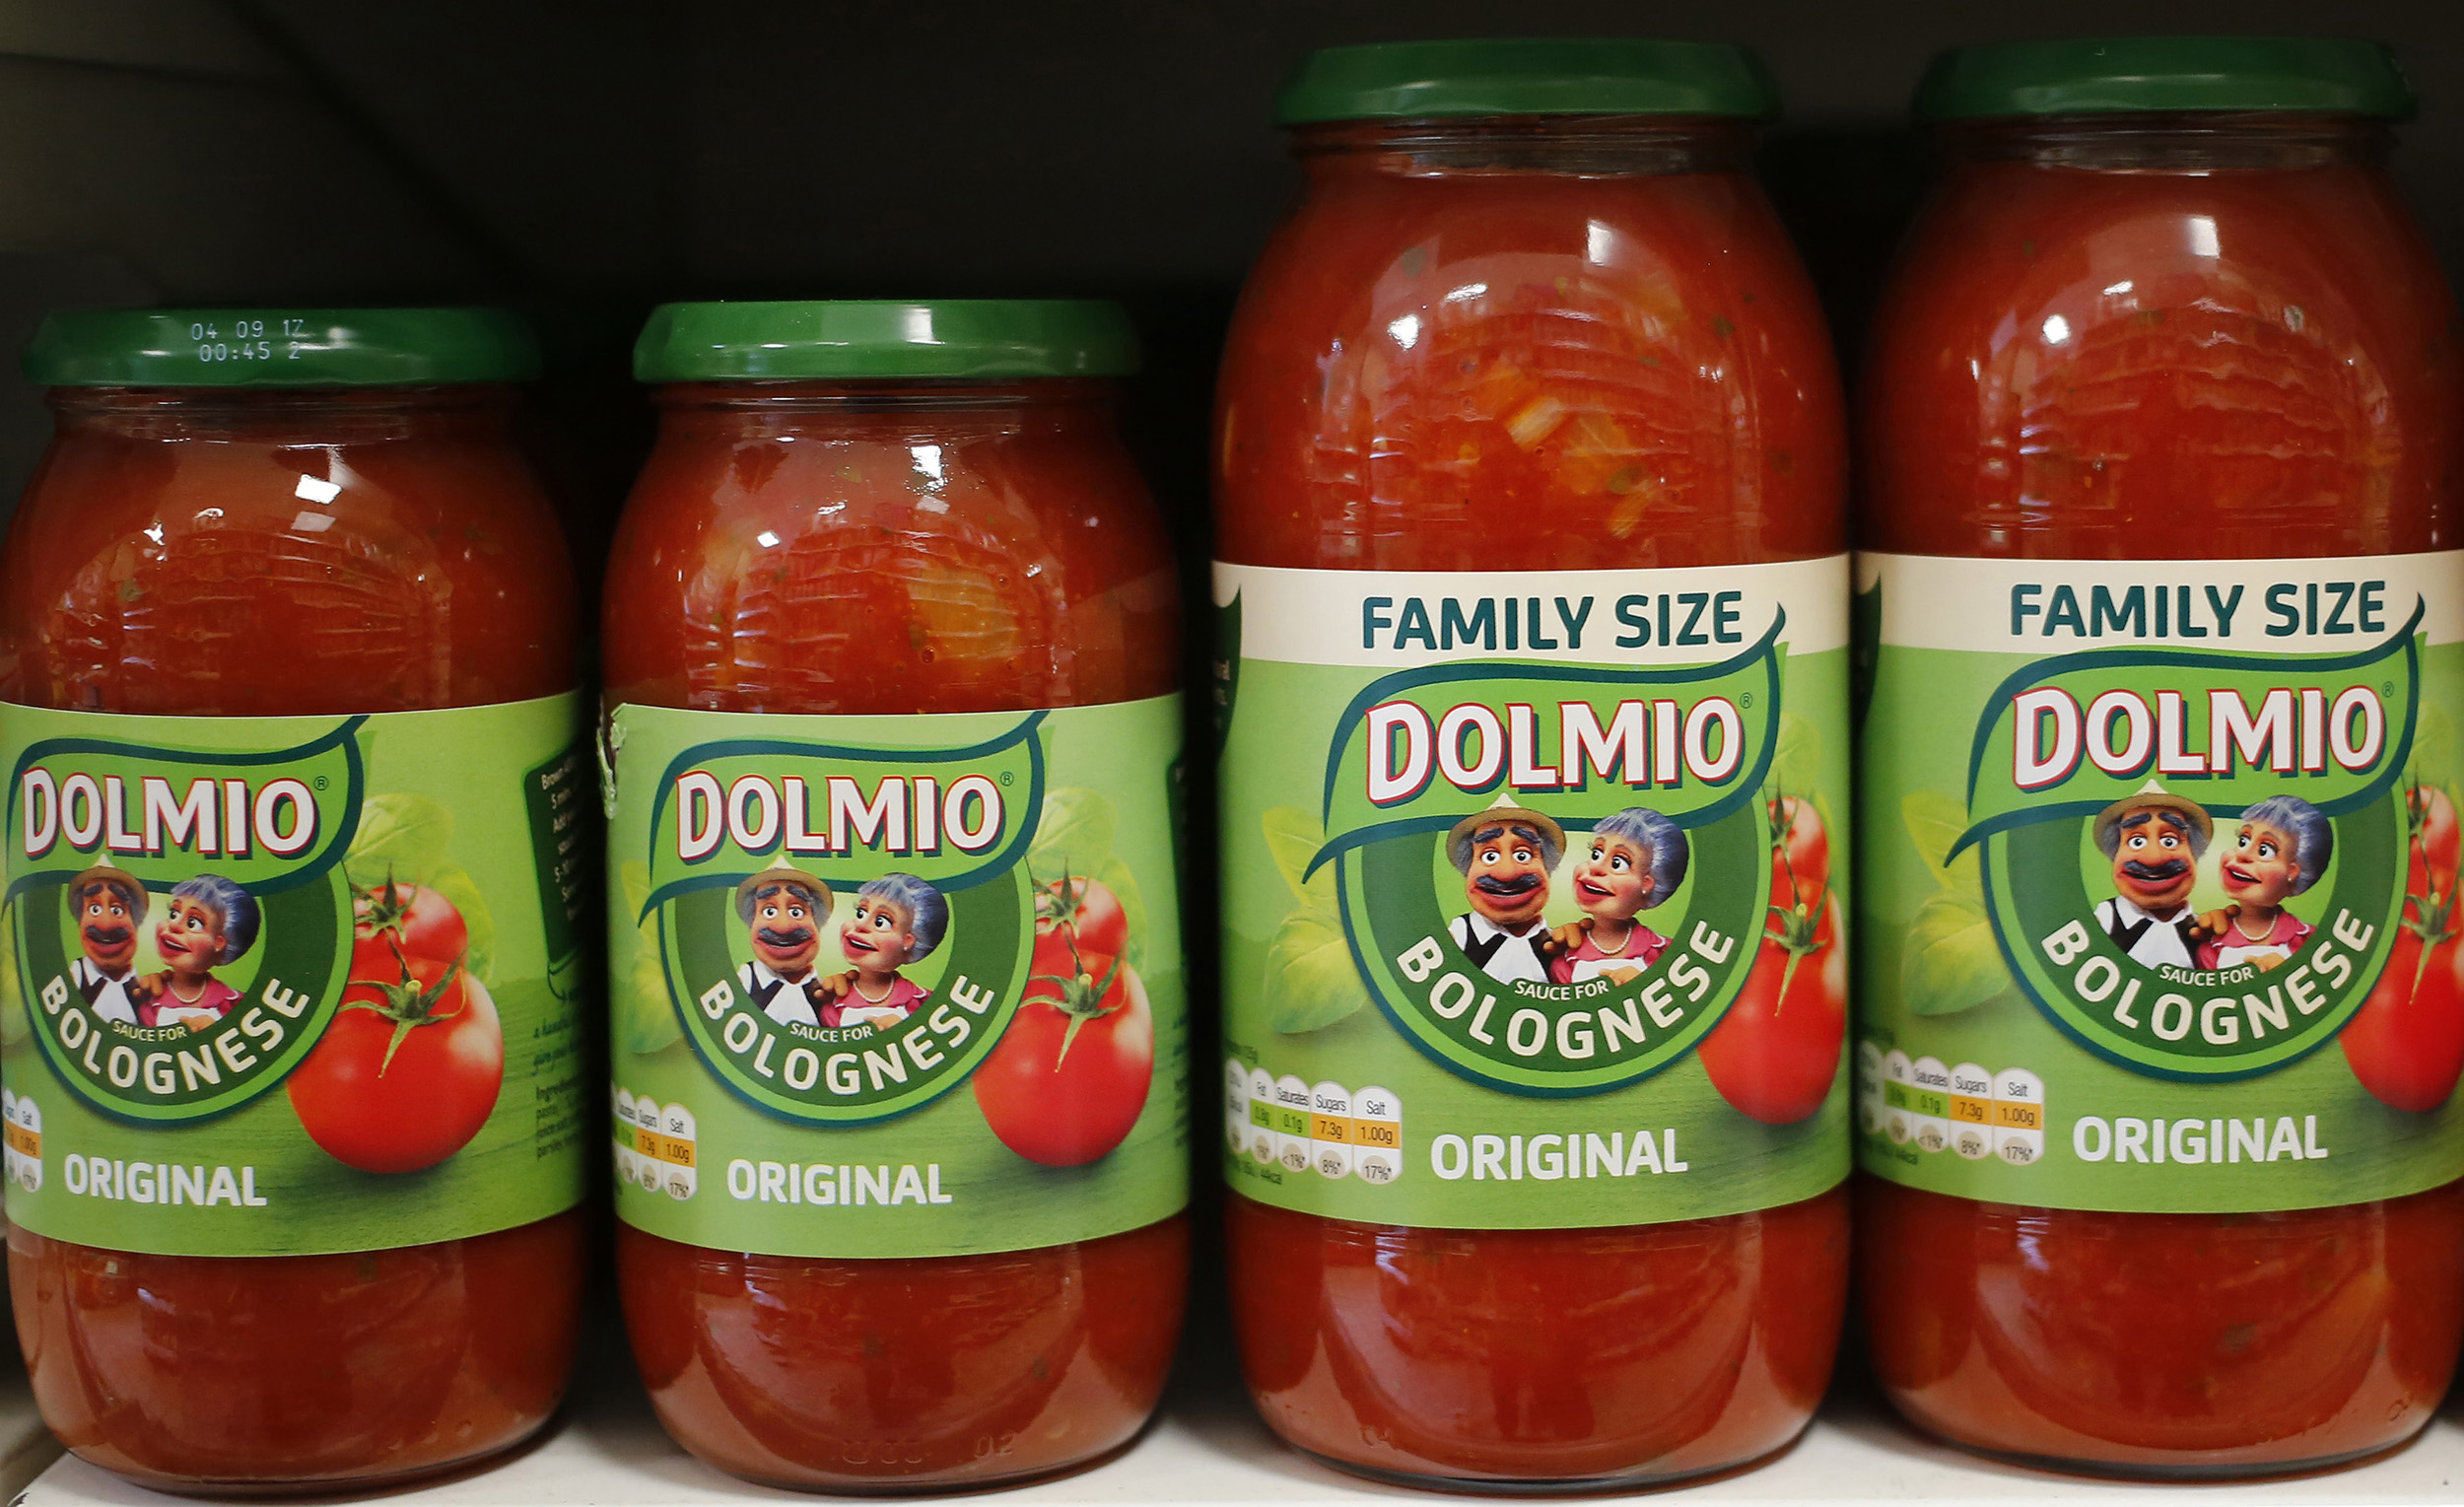 Dolmio pasta sauces are seen in a store in in London on April 15, 2016. (Stefan Wermuth—Reuters)